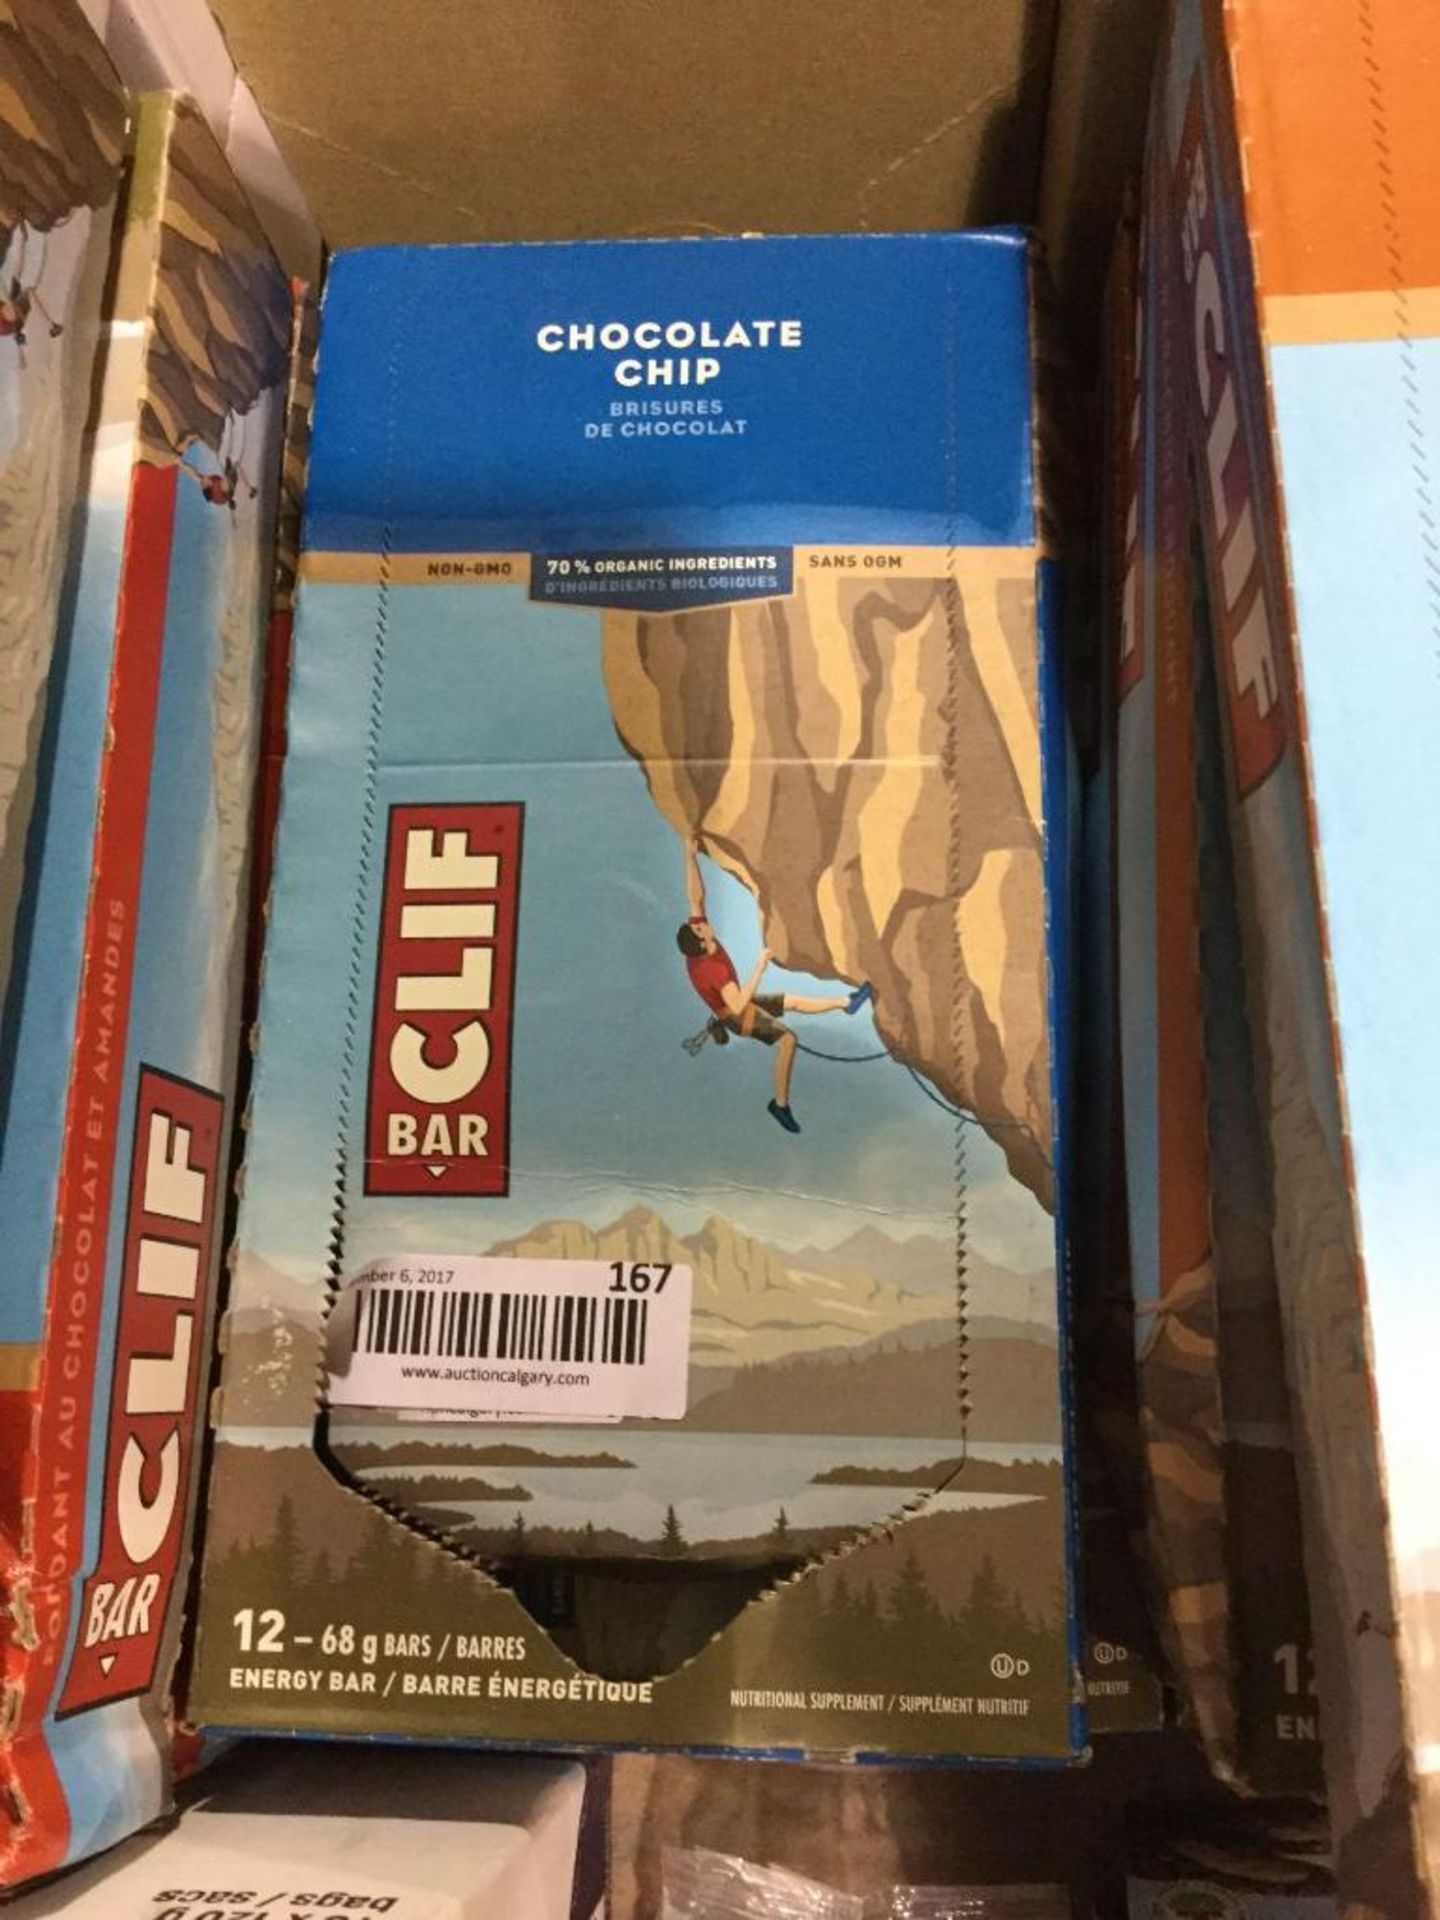 Case of 12 x 68 g Cliff Bars - Chocolate Chip